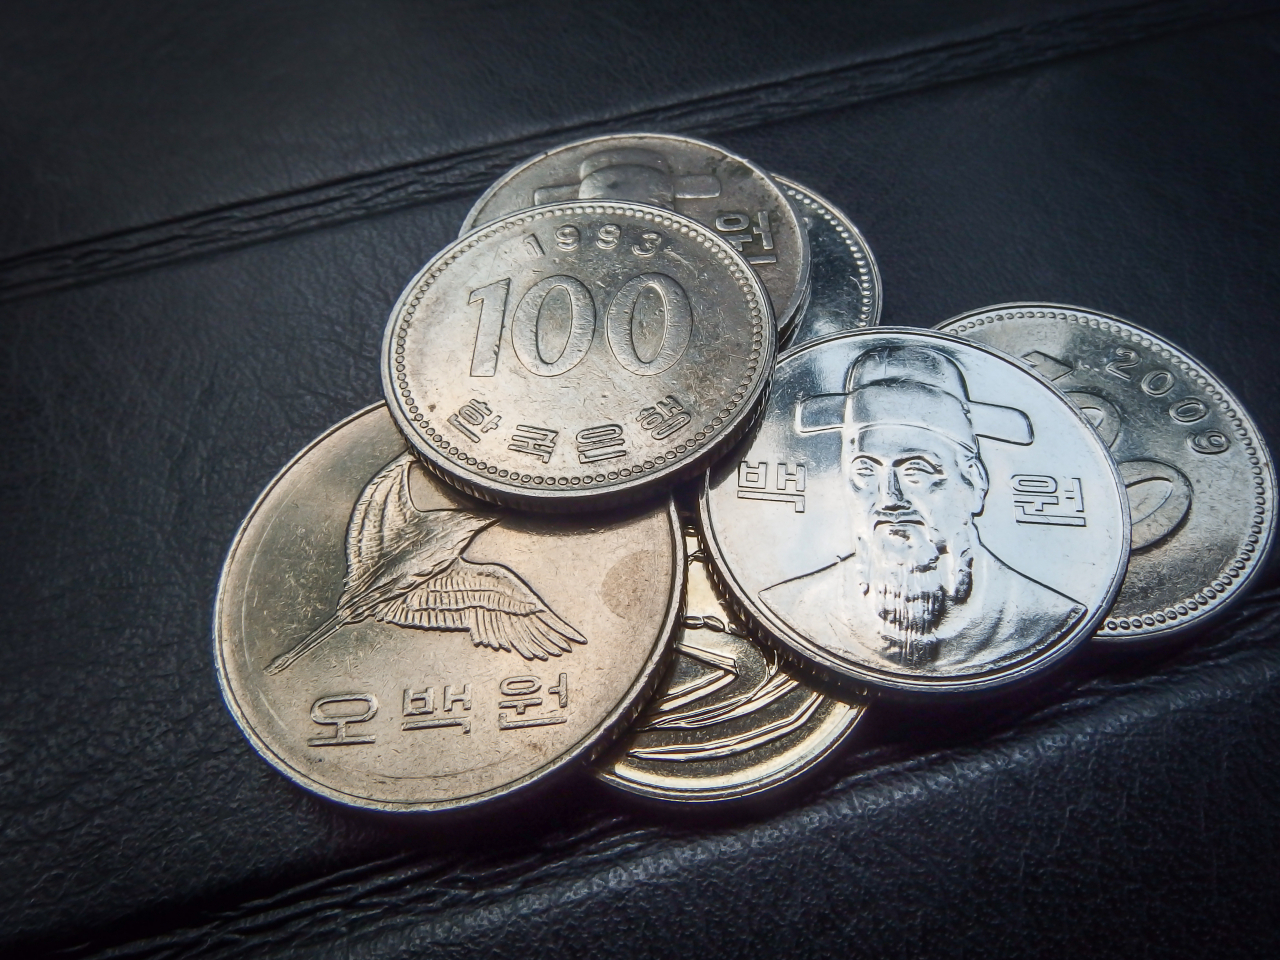 The face on the 100 won coin displays a portrait image of Navy Adm. Yi Sun-sin from the Joseon era. (123rf)